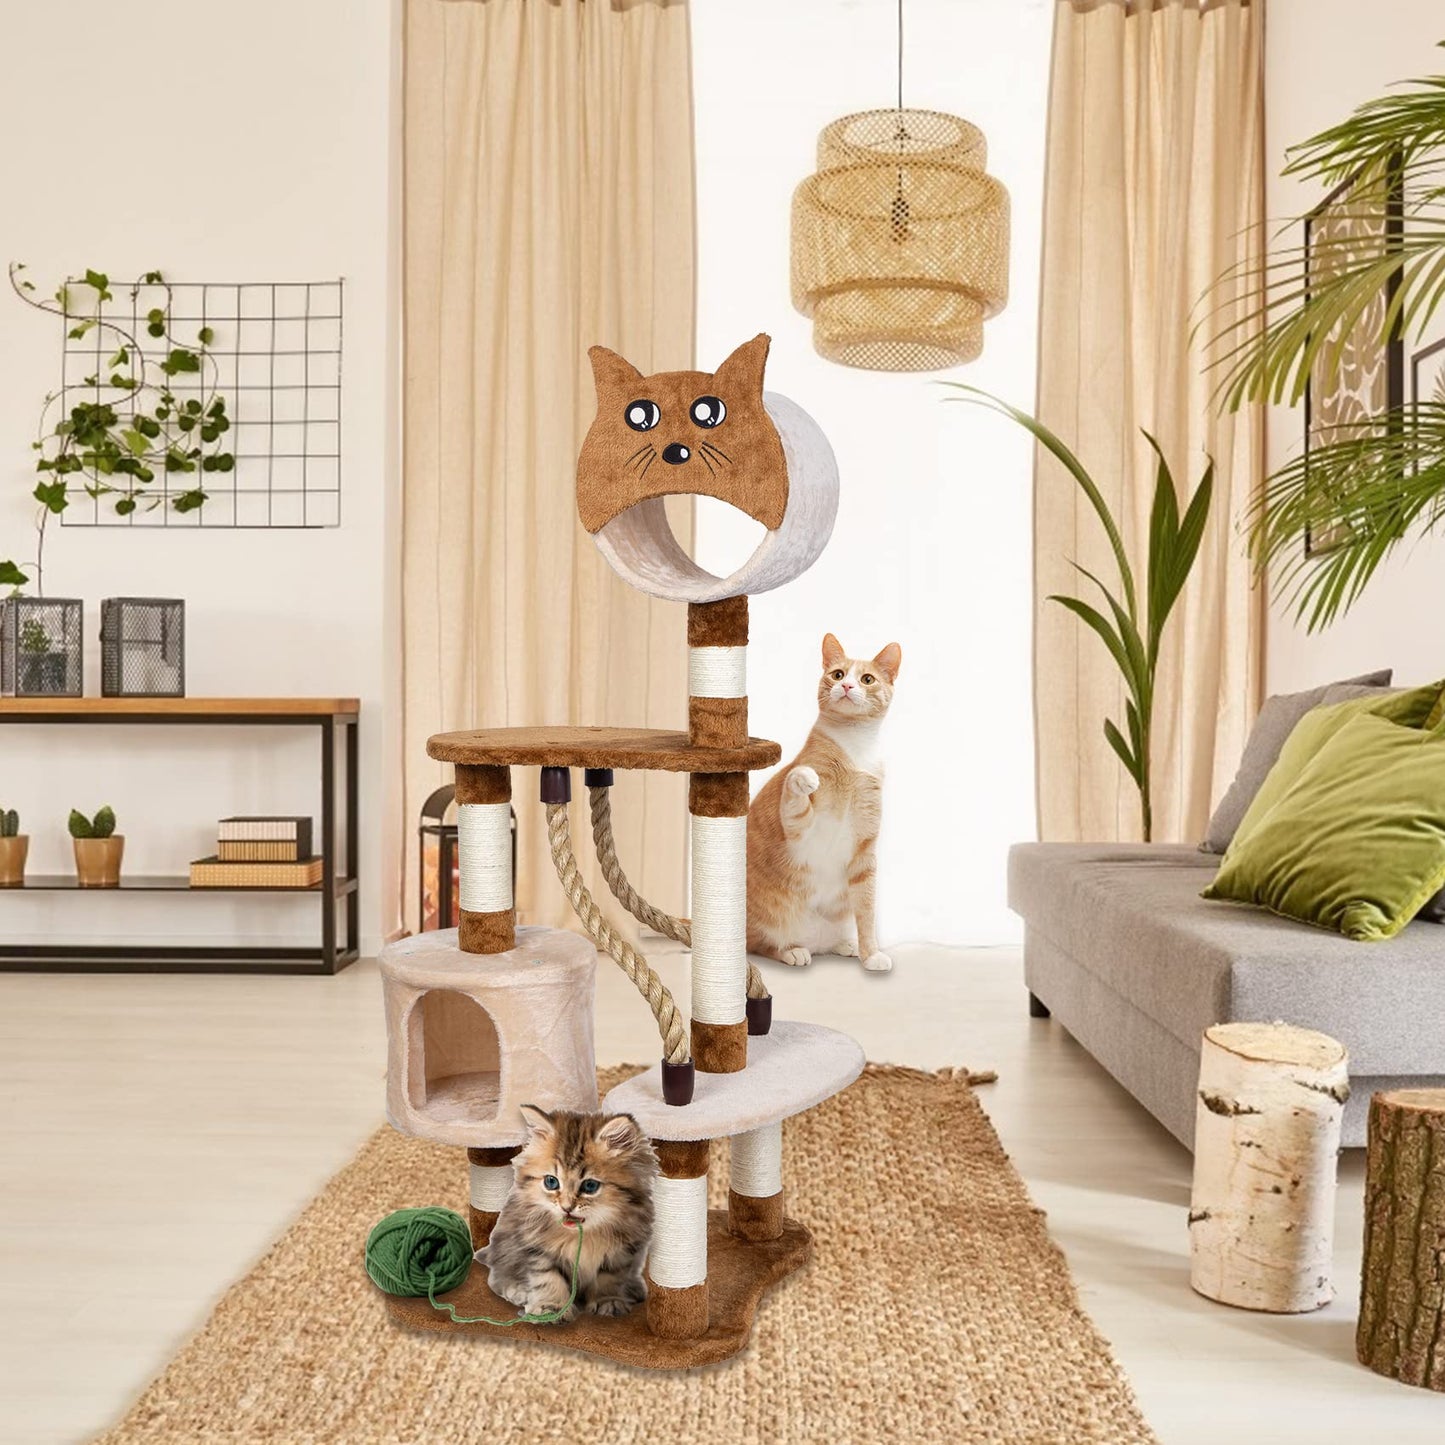 ASYPETS Cat Activity Tree 50鈥滿ulti-Level Wooden Pet Furniture